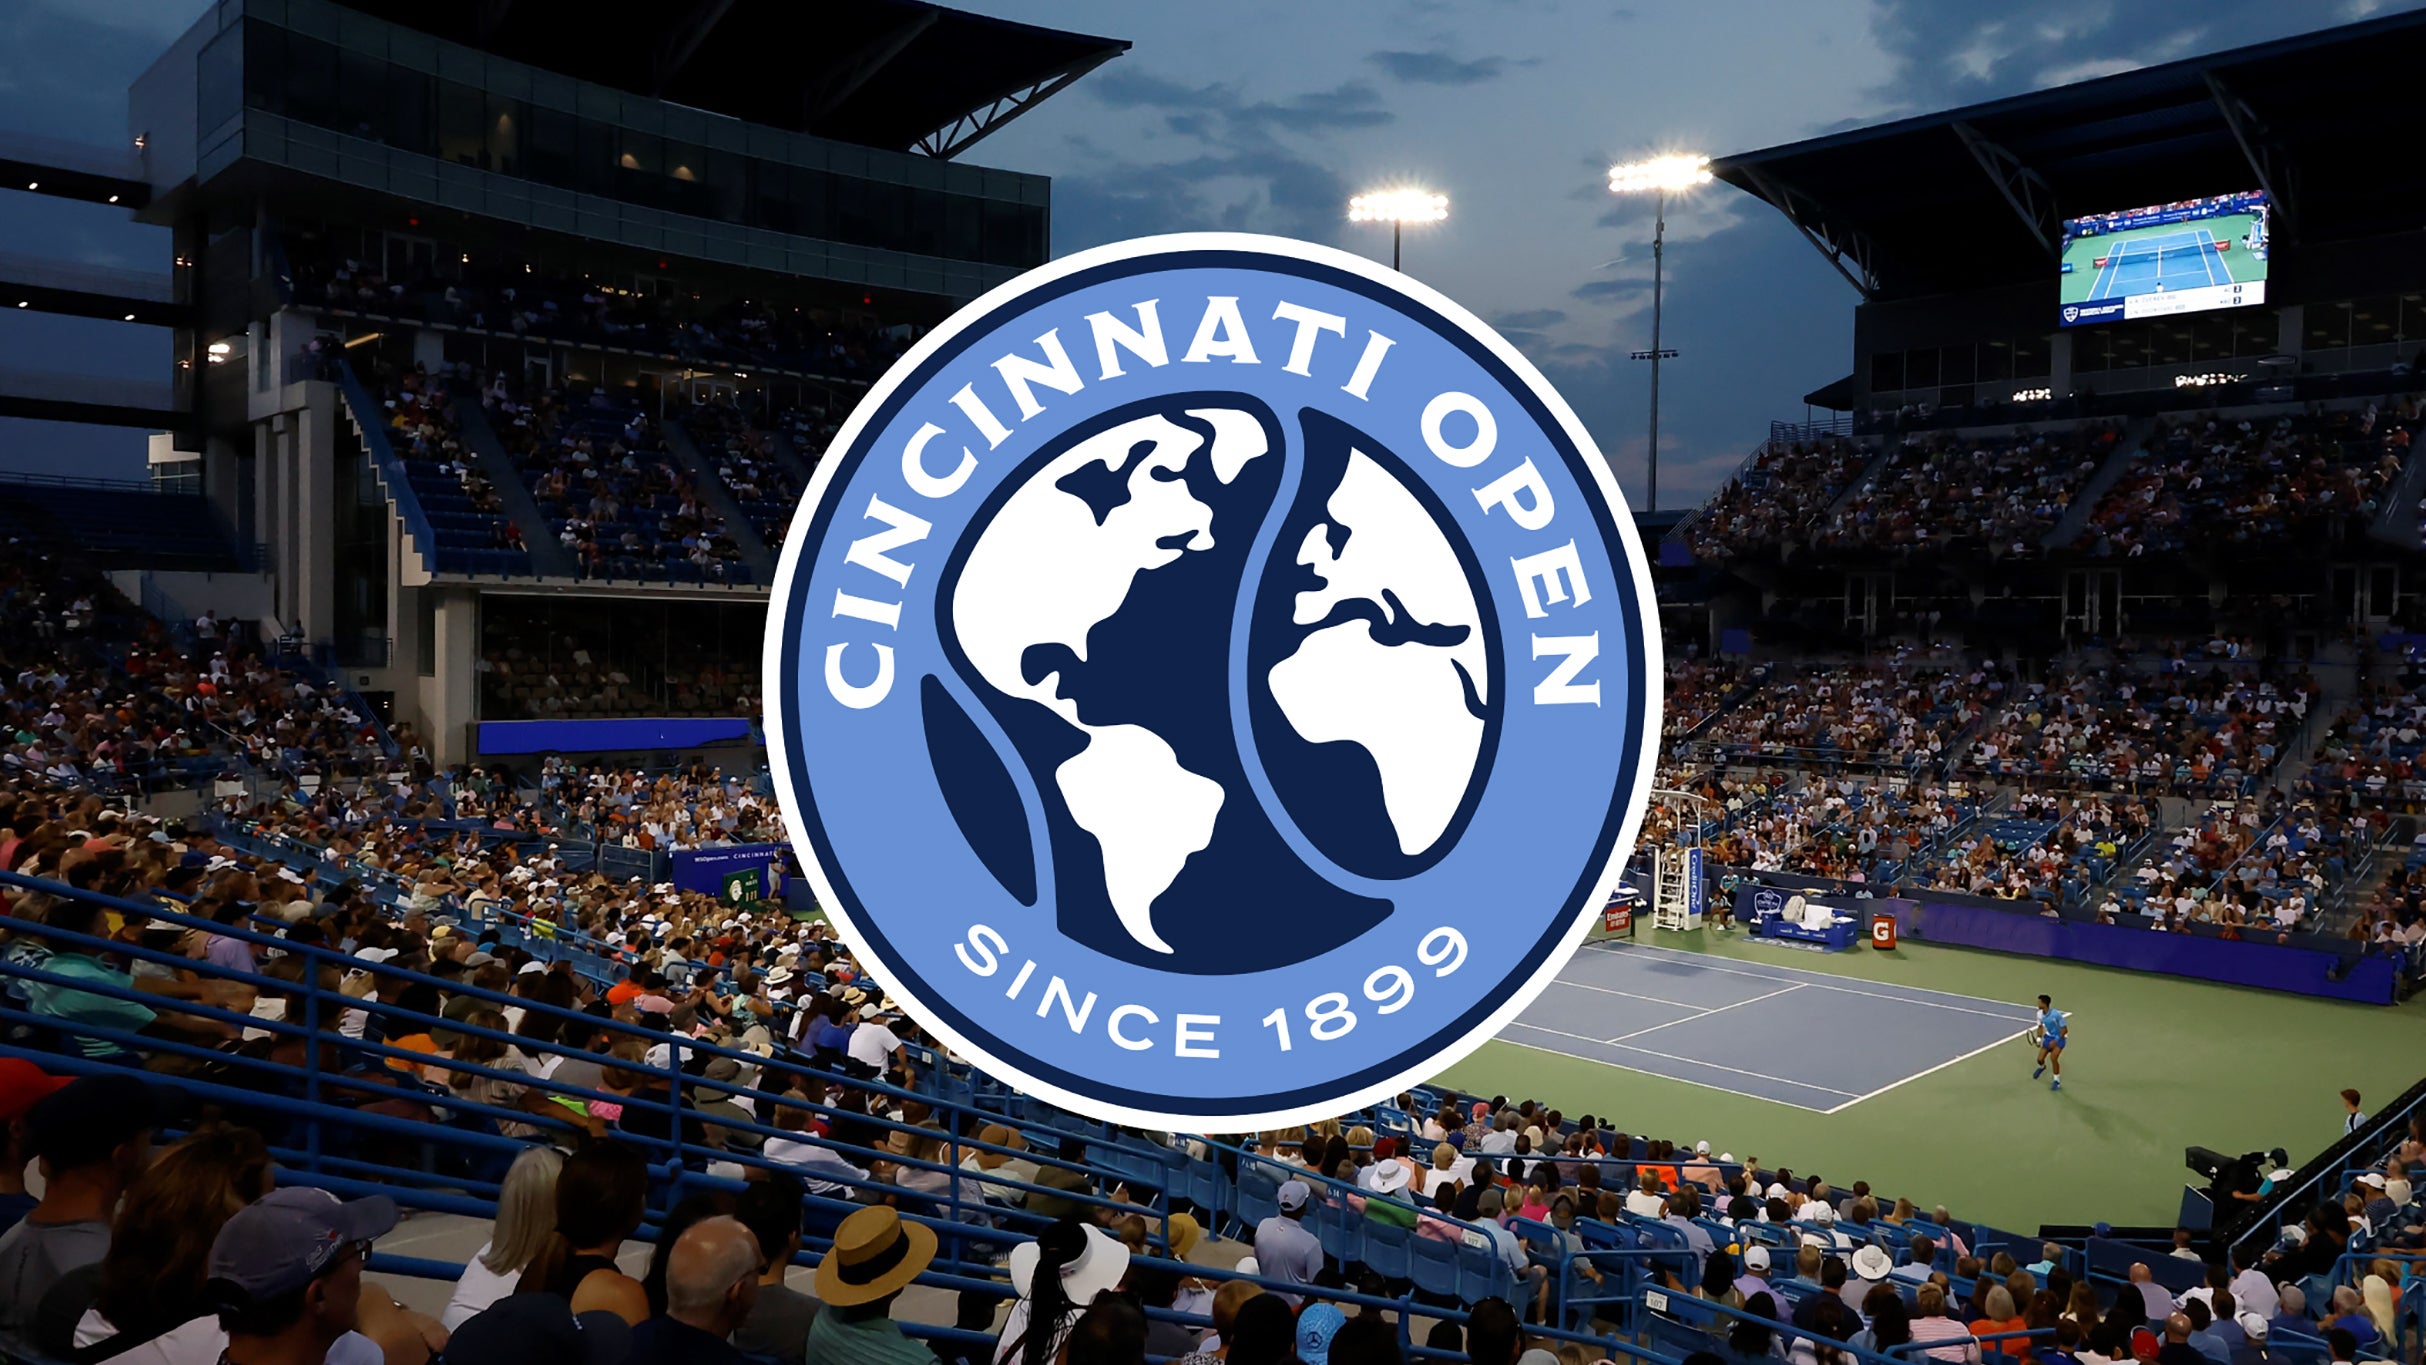 Session 16: Cincinnati Open presale code for show tickets in Mason, OH (Lindner Family Tennis Center)